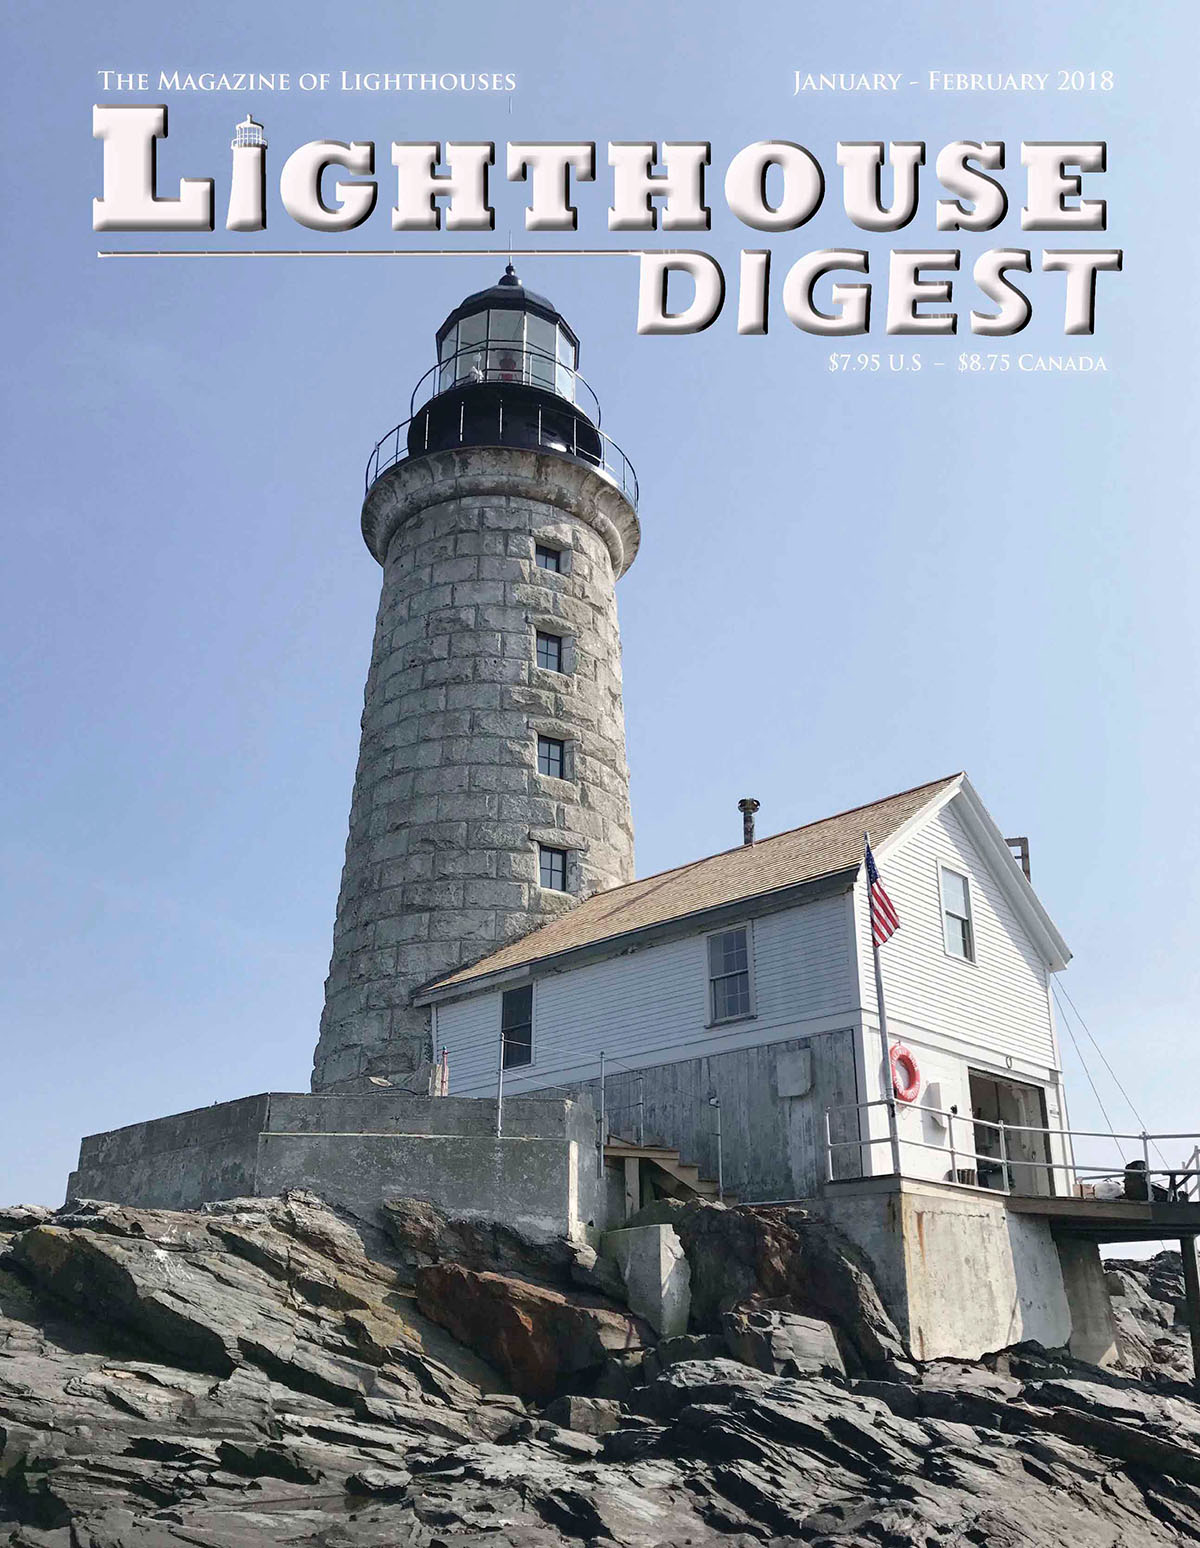 Lighthouse Digest Jan-Feb 2018 with the renovated Halfway Rock Light Station on the cover.